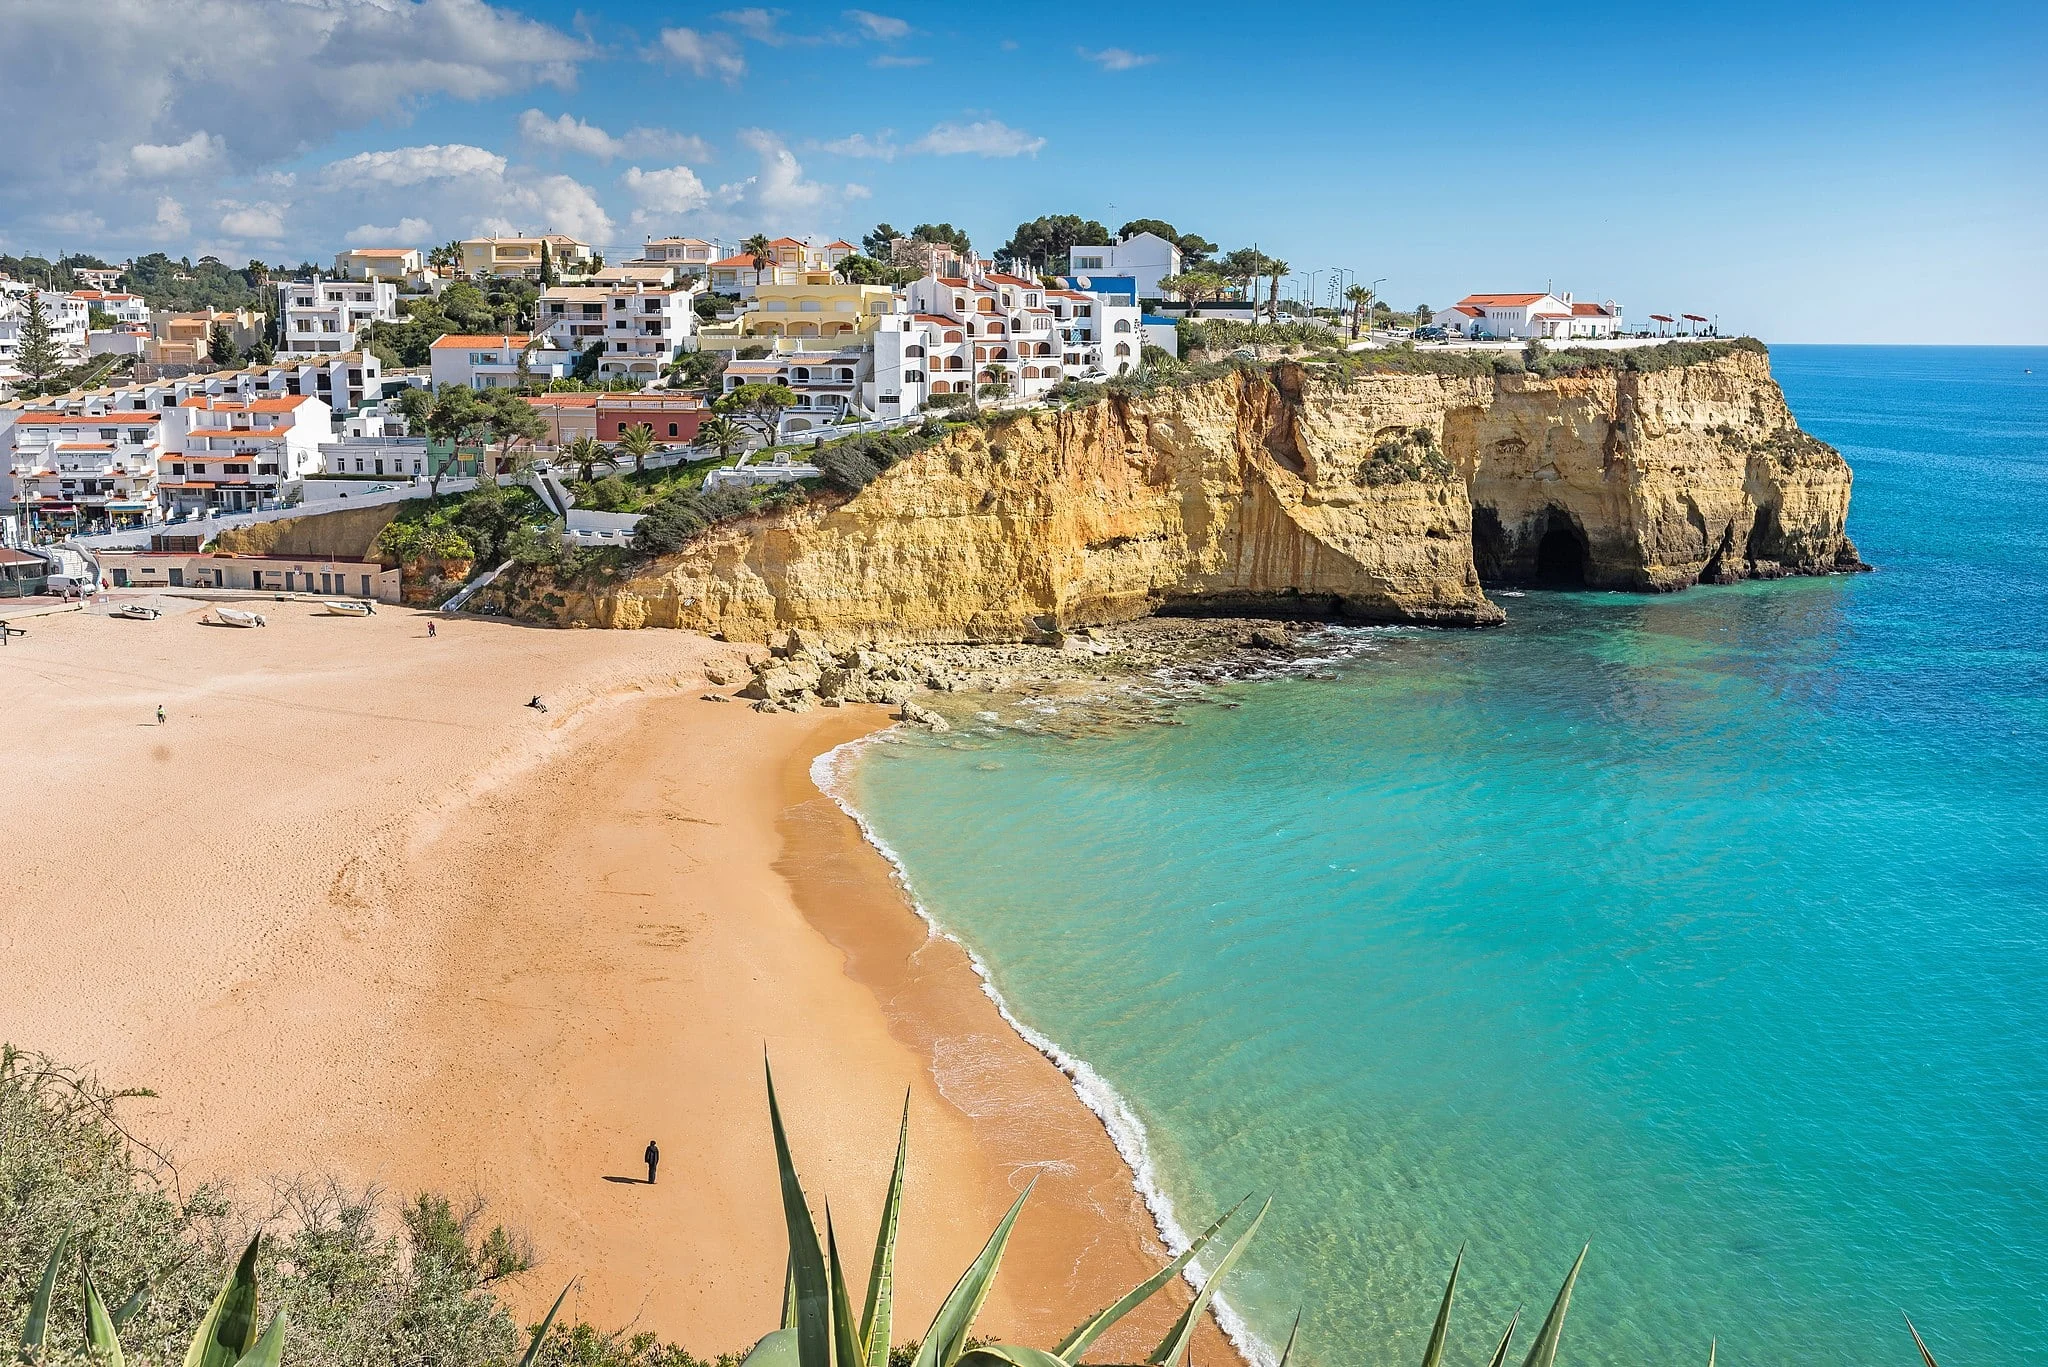 23 Things to know before visiting Portugal - Best Portugal Travel Tips, Praia da carvoeiro, instagrammable places in Algarve